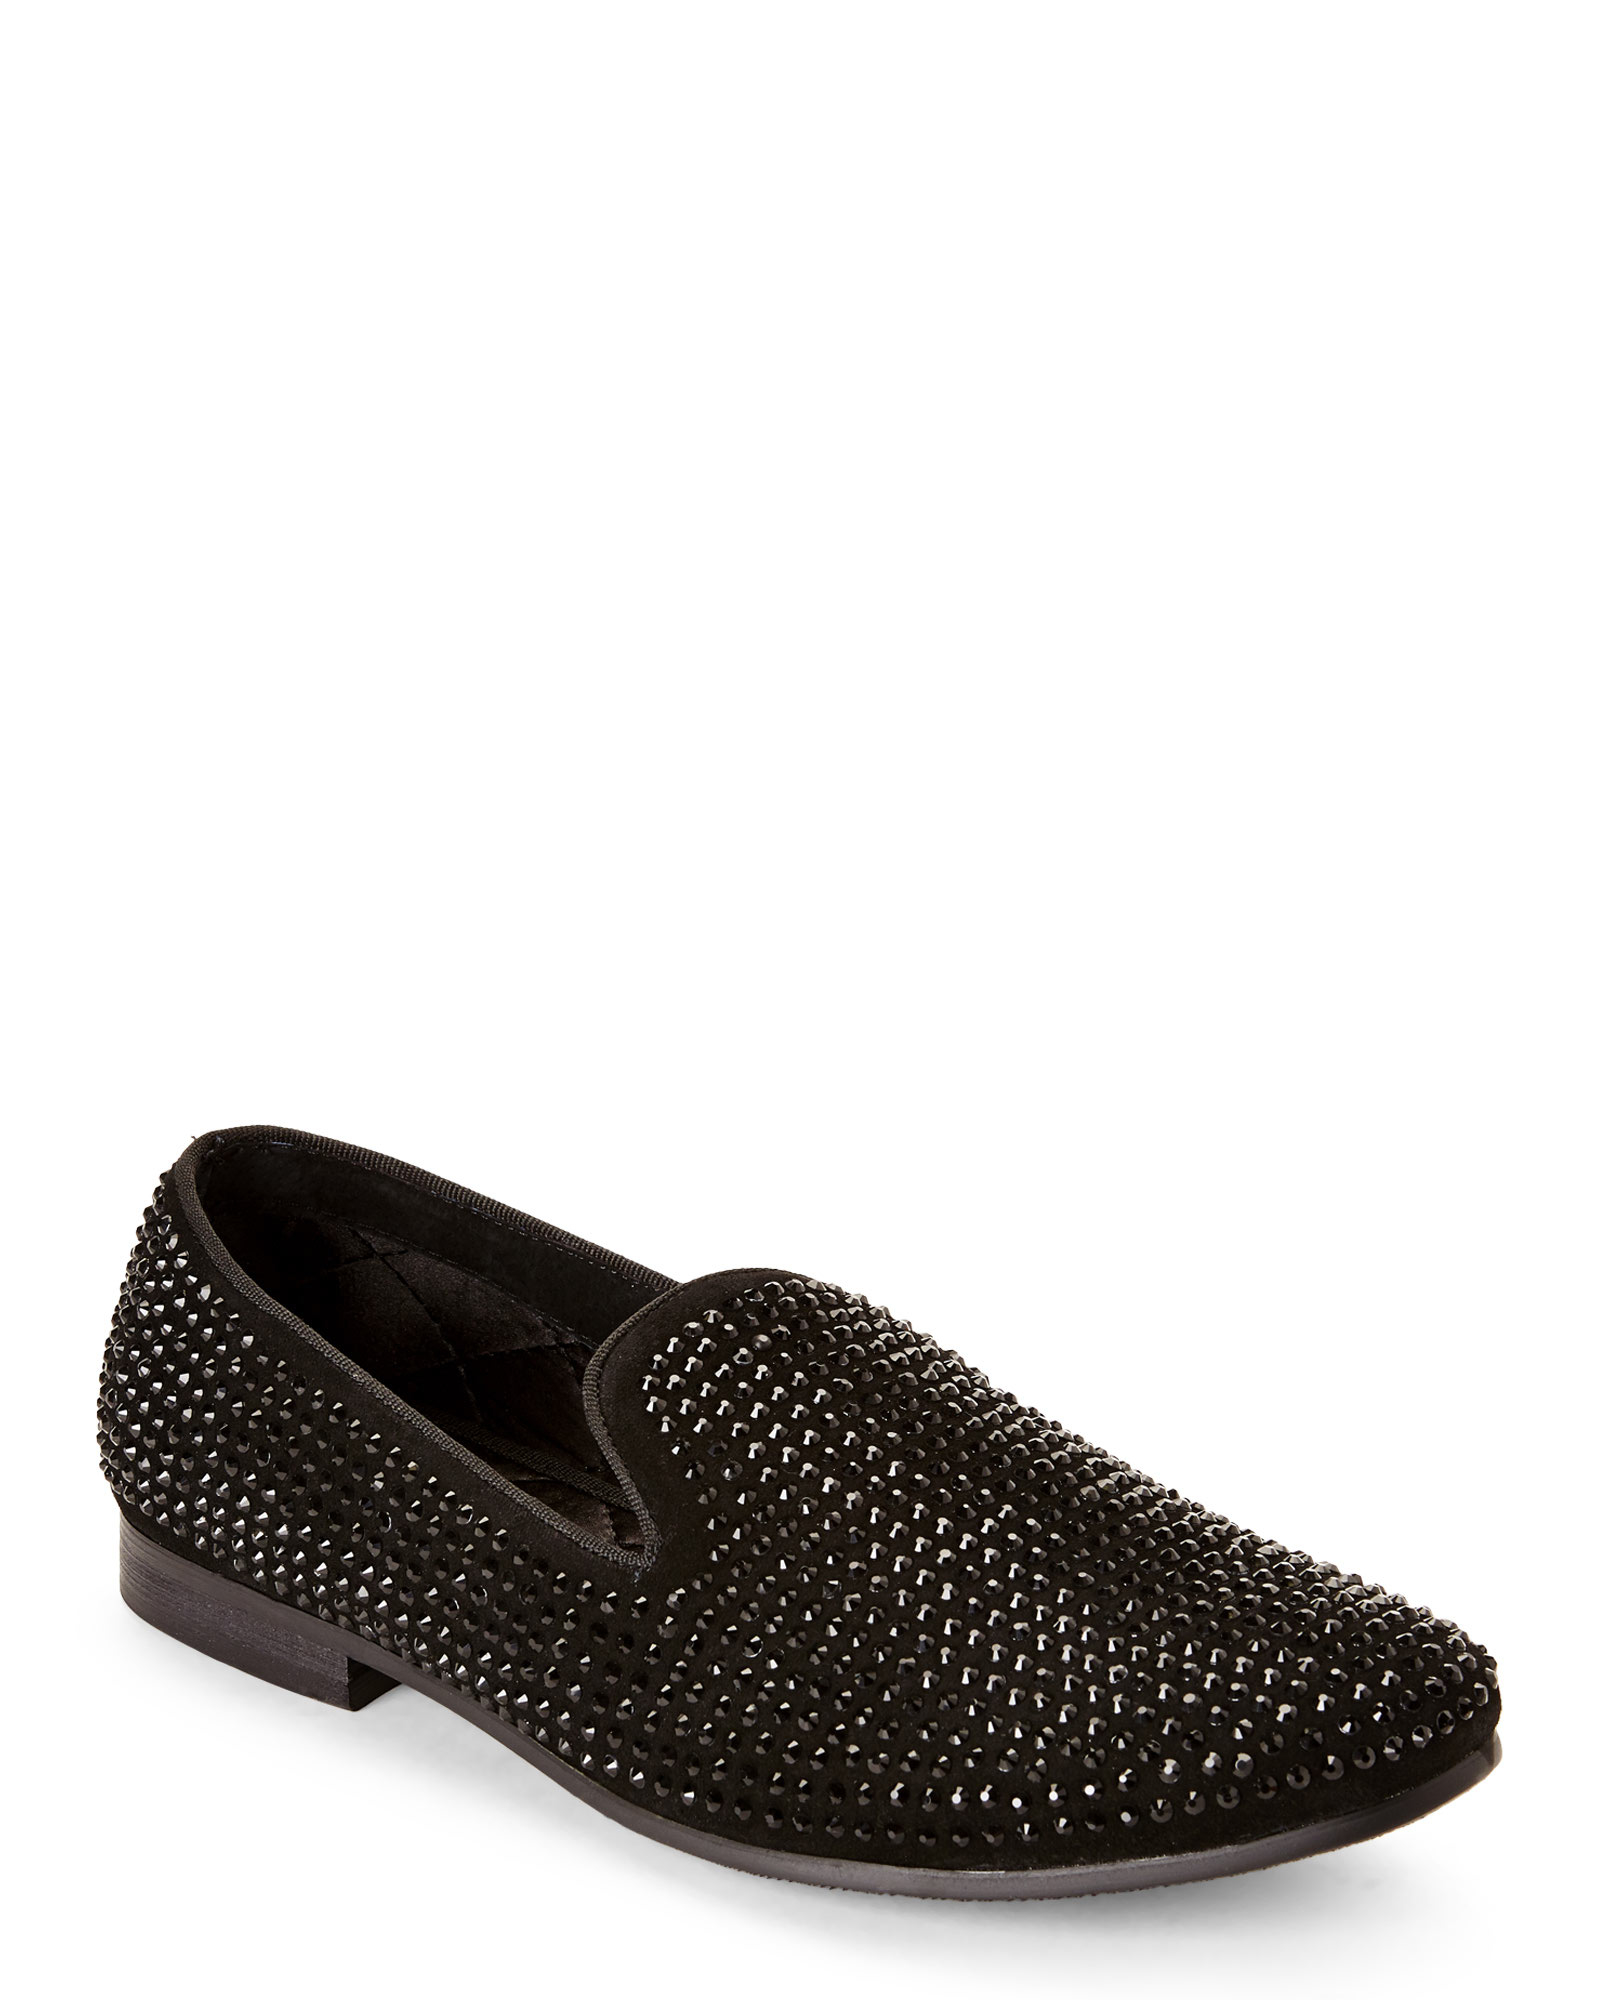 Steve Madden Black Caviarr Smoking Loafers for Men - Lyst